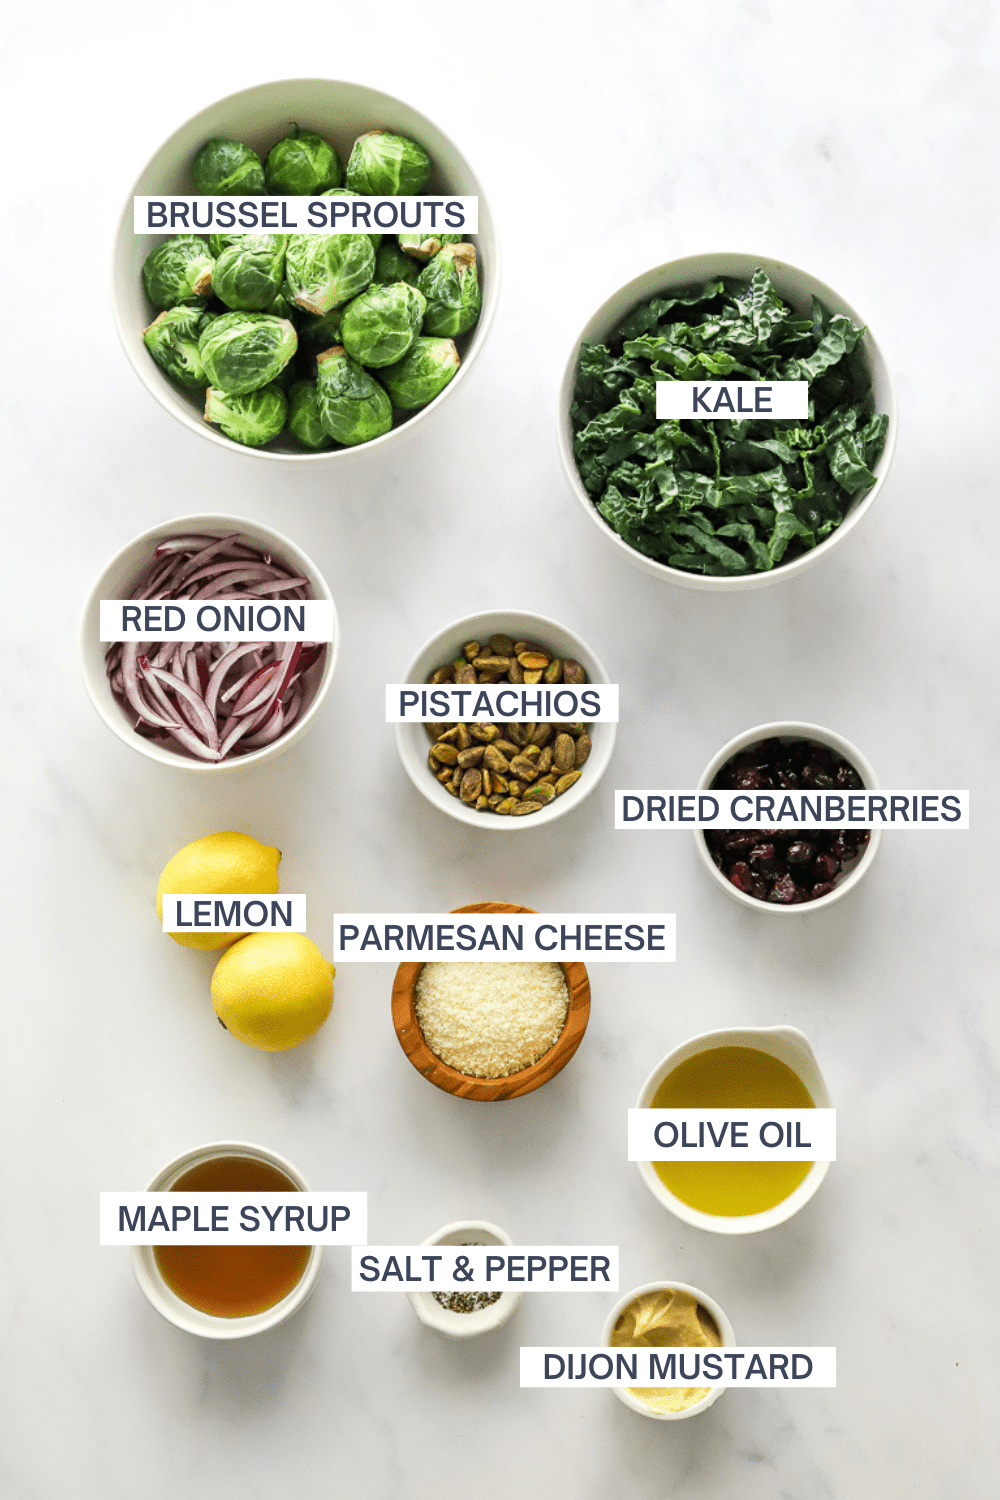 Ingredients for kale Brussel sprout salad with labels over each ingredient.